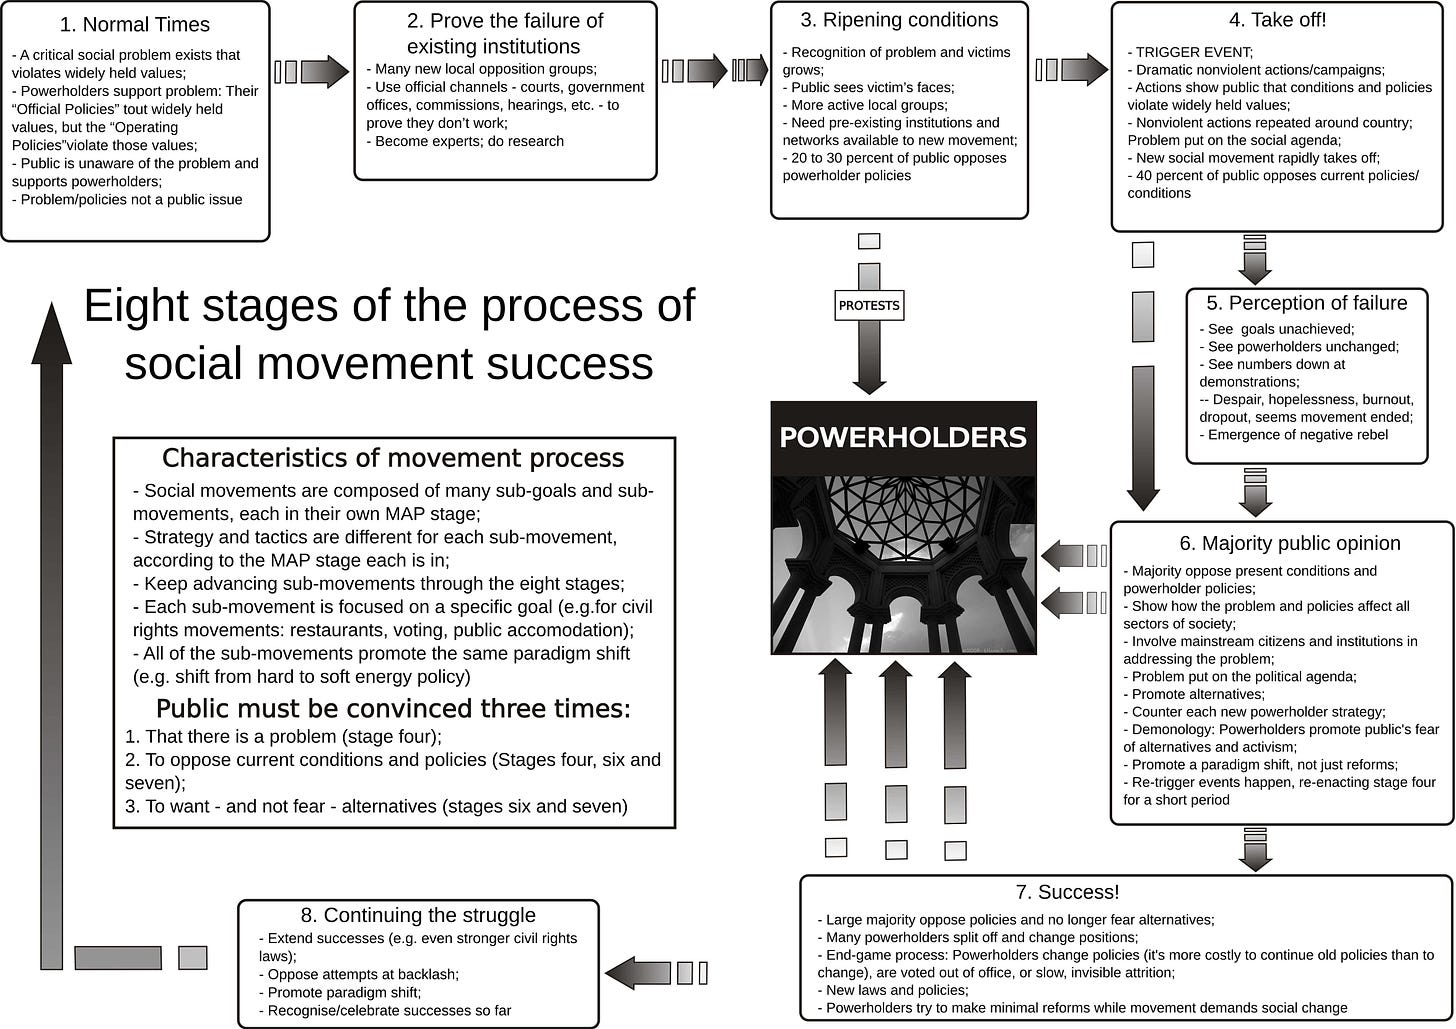 flow diagram showing the 8 stages of a social movement